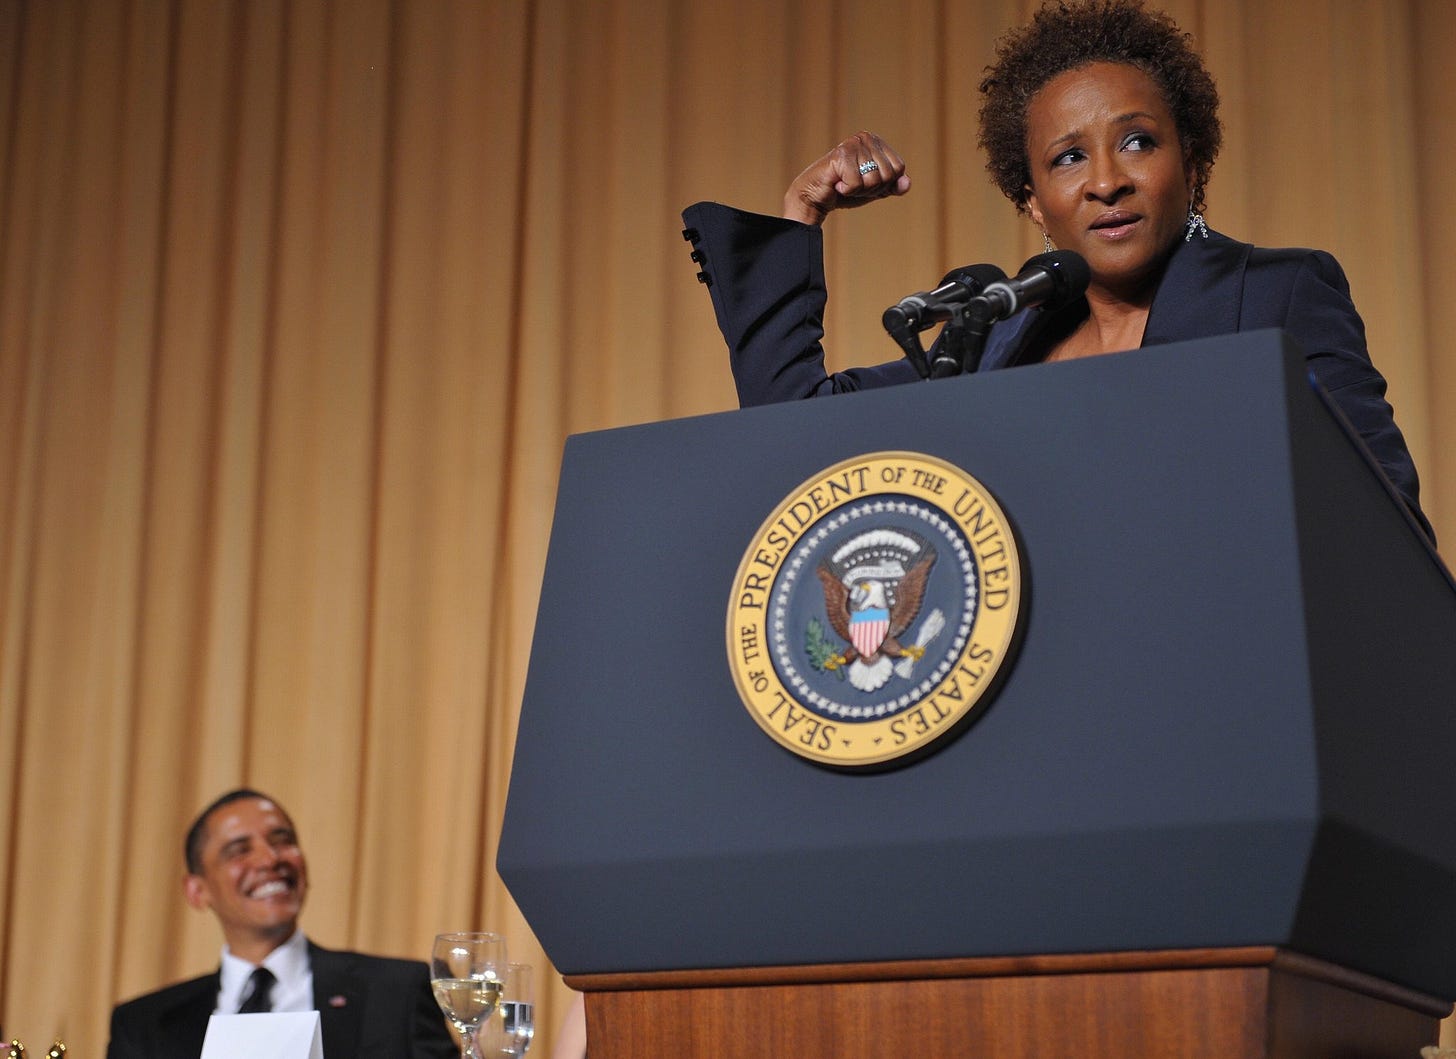 Wanda Sykes on Ignoring Michelle Obama and Leaving 'Roseanne' - The New ...